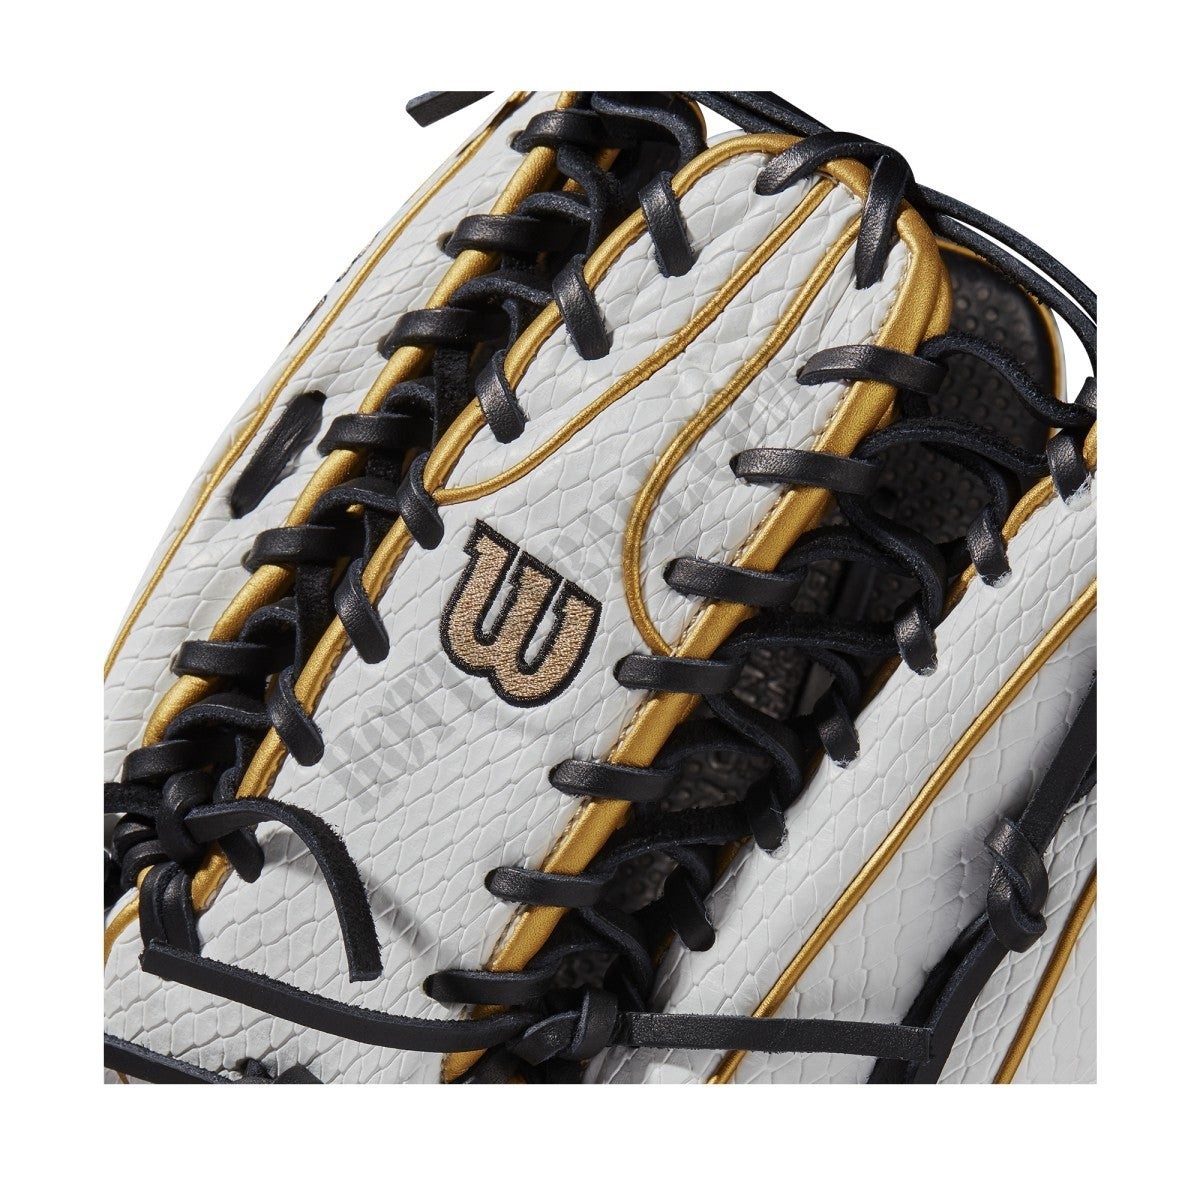 2021 A2000 OT7SS Six String 12.75" Outfield Baseball Glove ● Wilson Promotions - -5